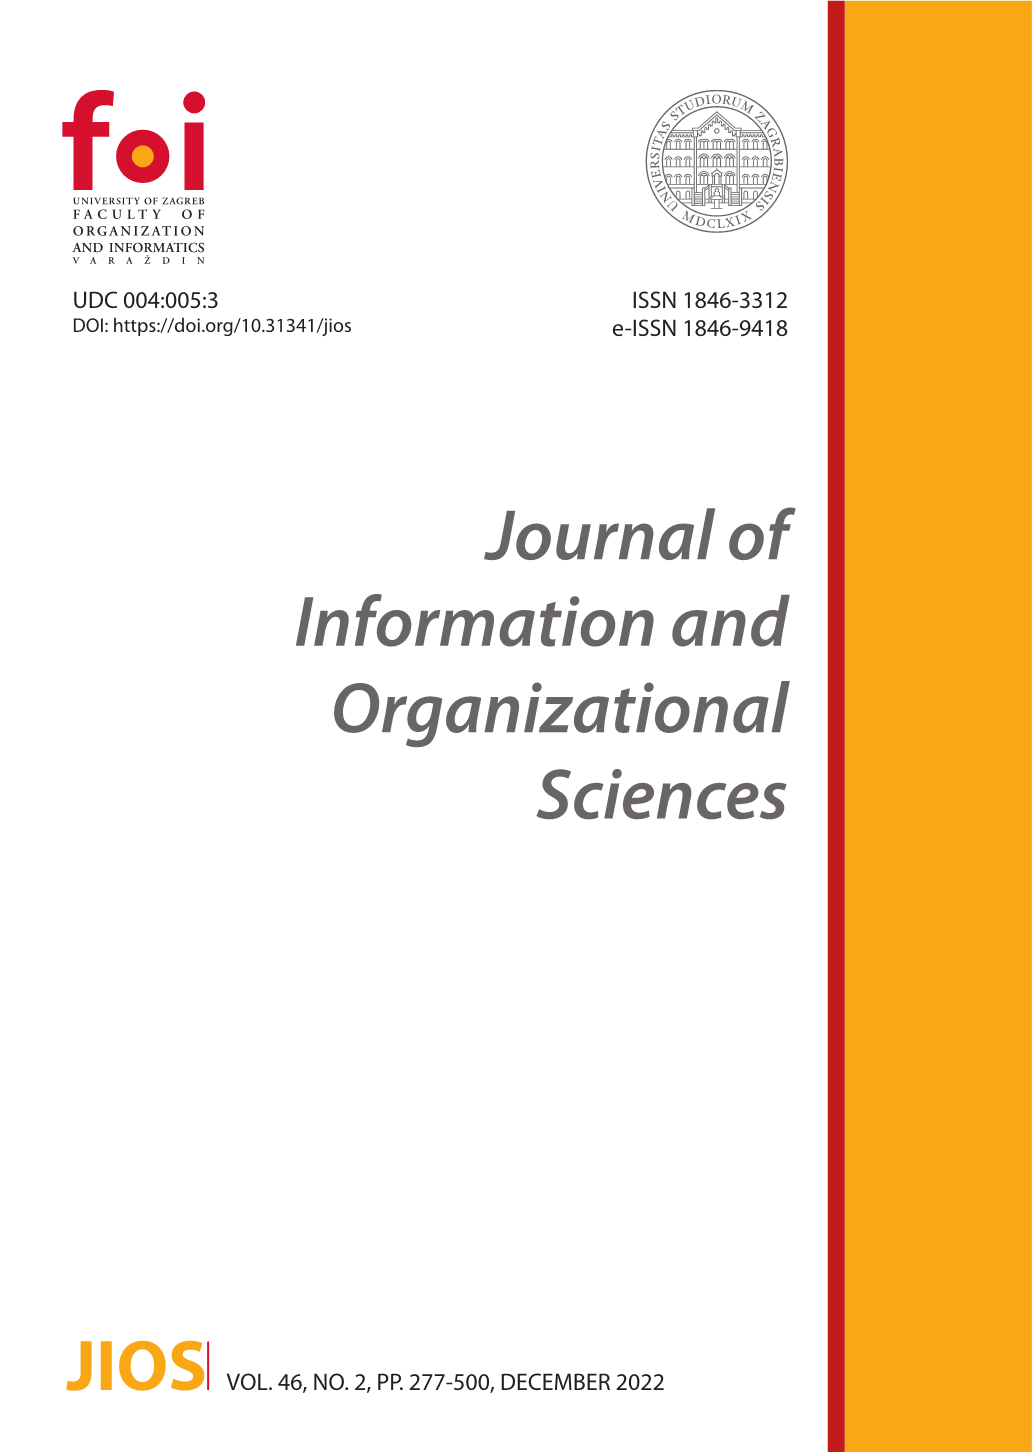 Role of Emotional Intelligence in Managing Organizational Culture During Covid-19 – A Cross-Sectional Study